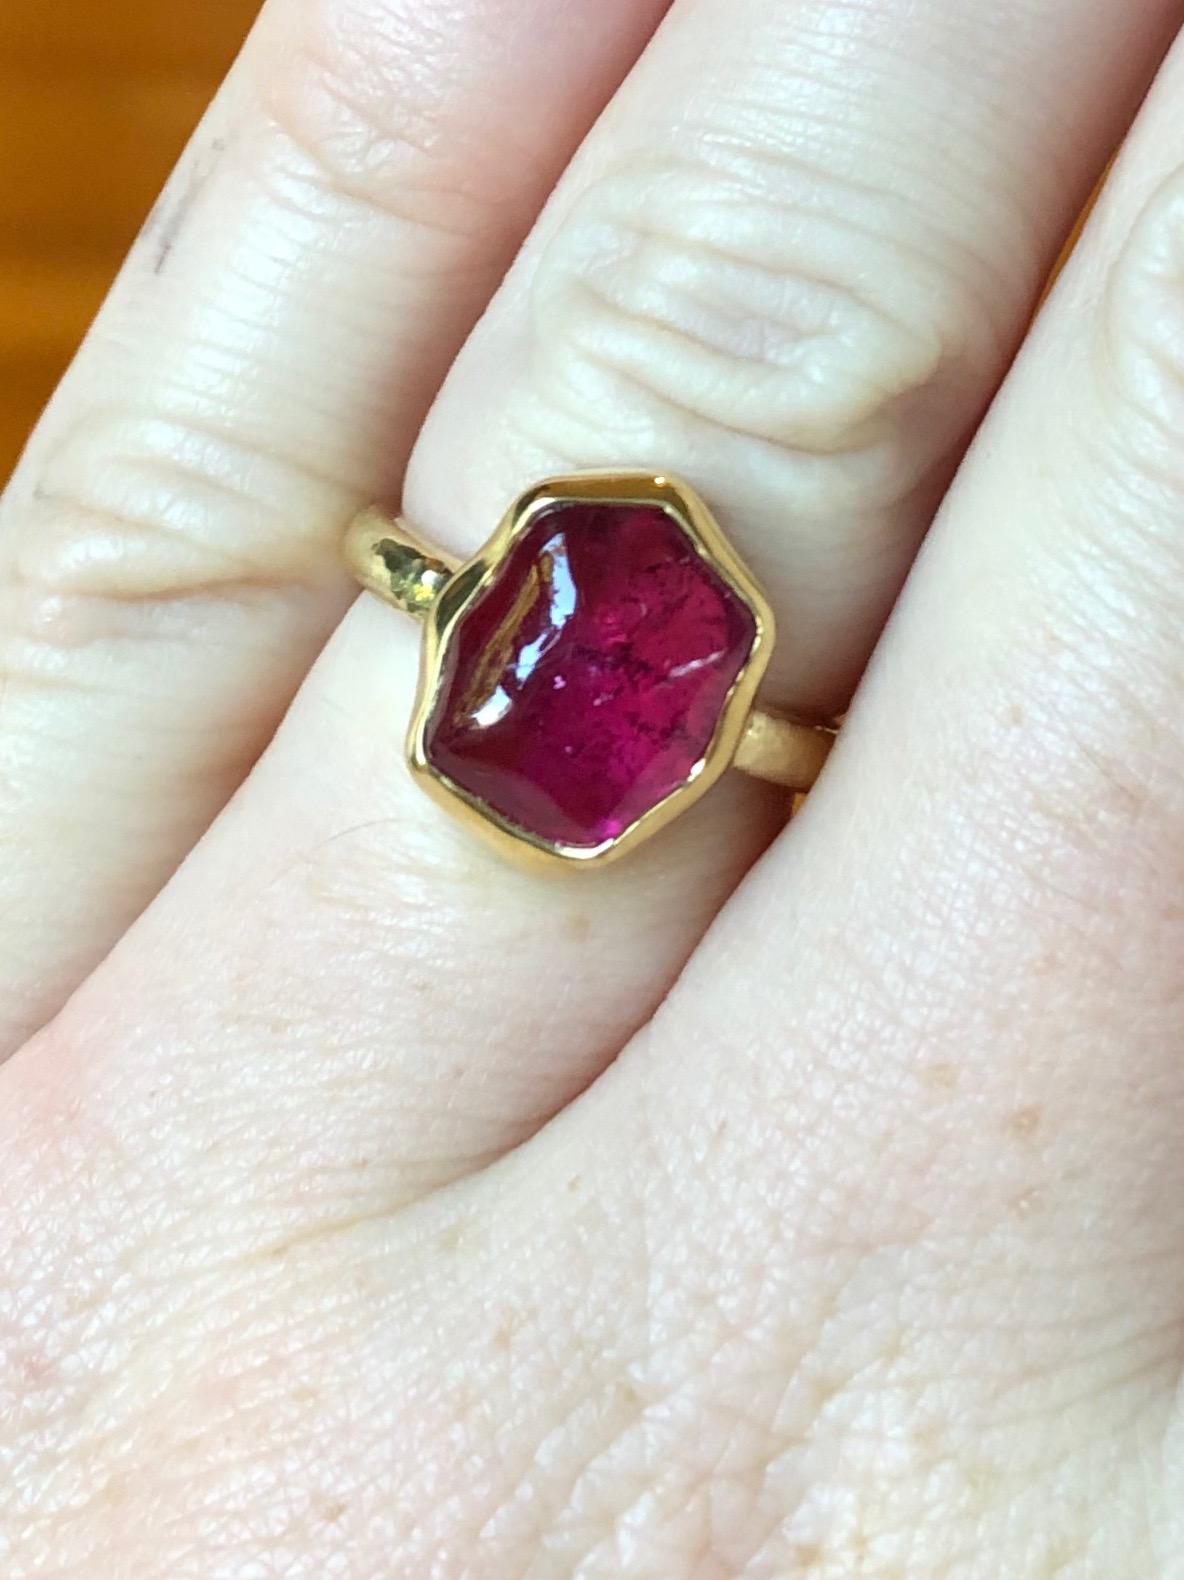 Performs miraculously in every light with incredible depth of color. German cut baroque African rubellite in our hand fabricated 100% recycled gold 18 karat setting. Part of our baroque gem collection. Polished bezel, hand hammered shank.

Fine